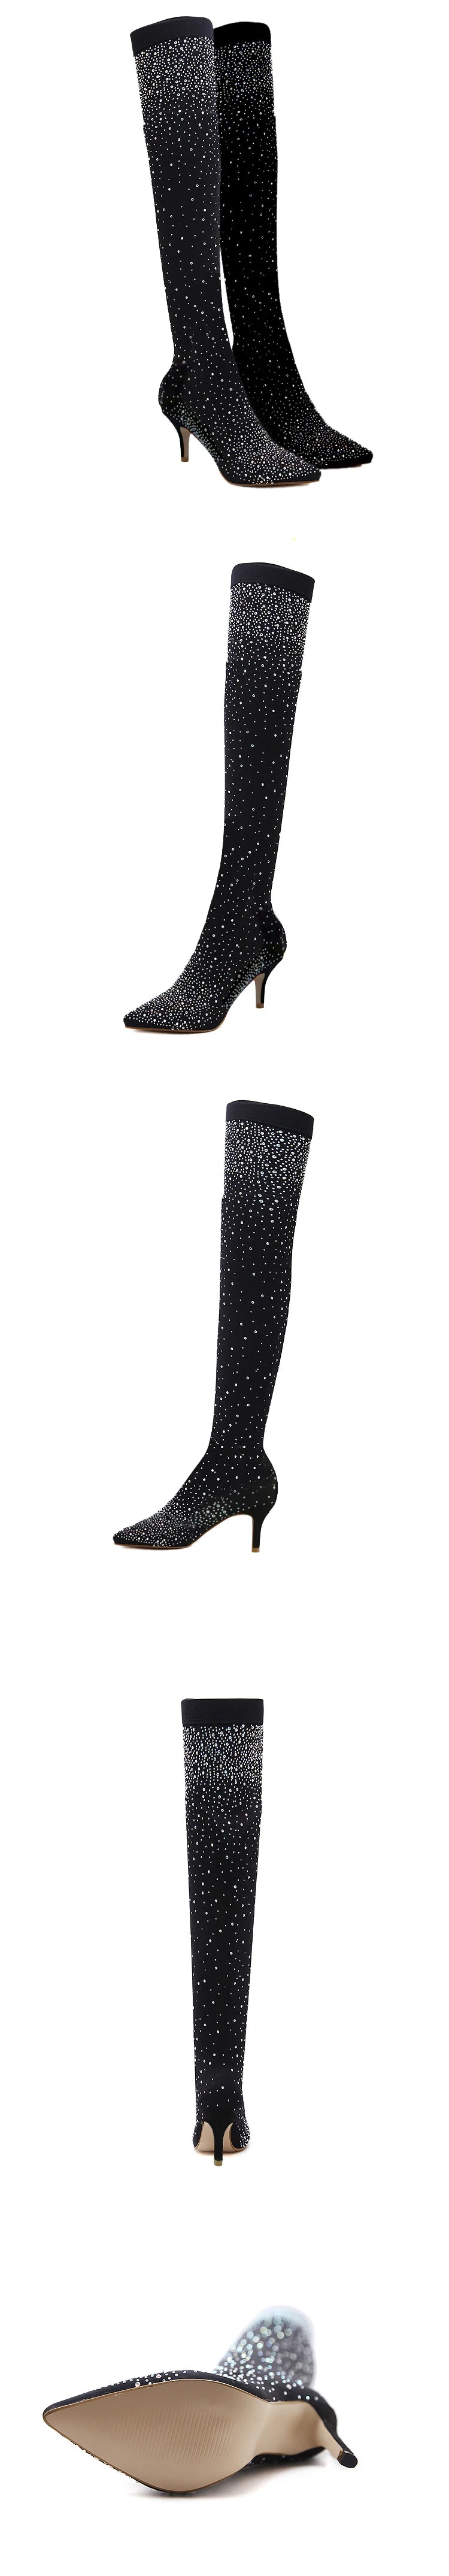 Design Crystal Rhinestone Stretch Fabric Sexy High Heels Sock Over-the-Knee Boots Pointed Toe Pole Dancing Women Shoes